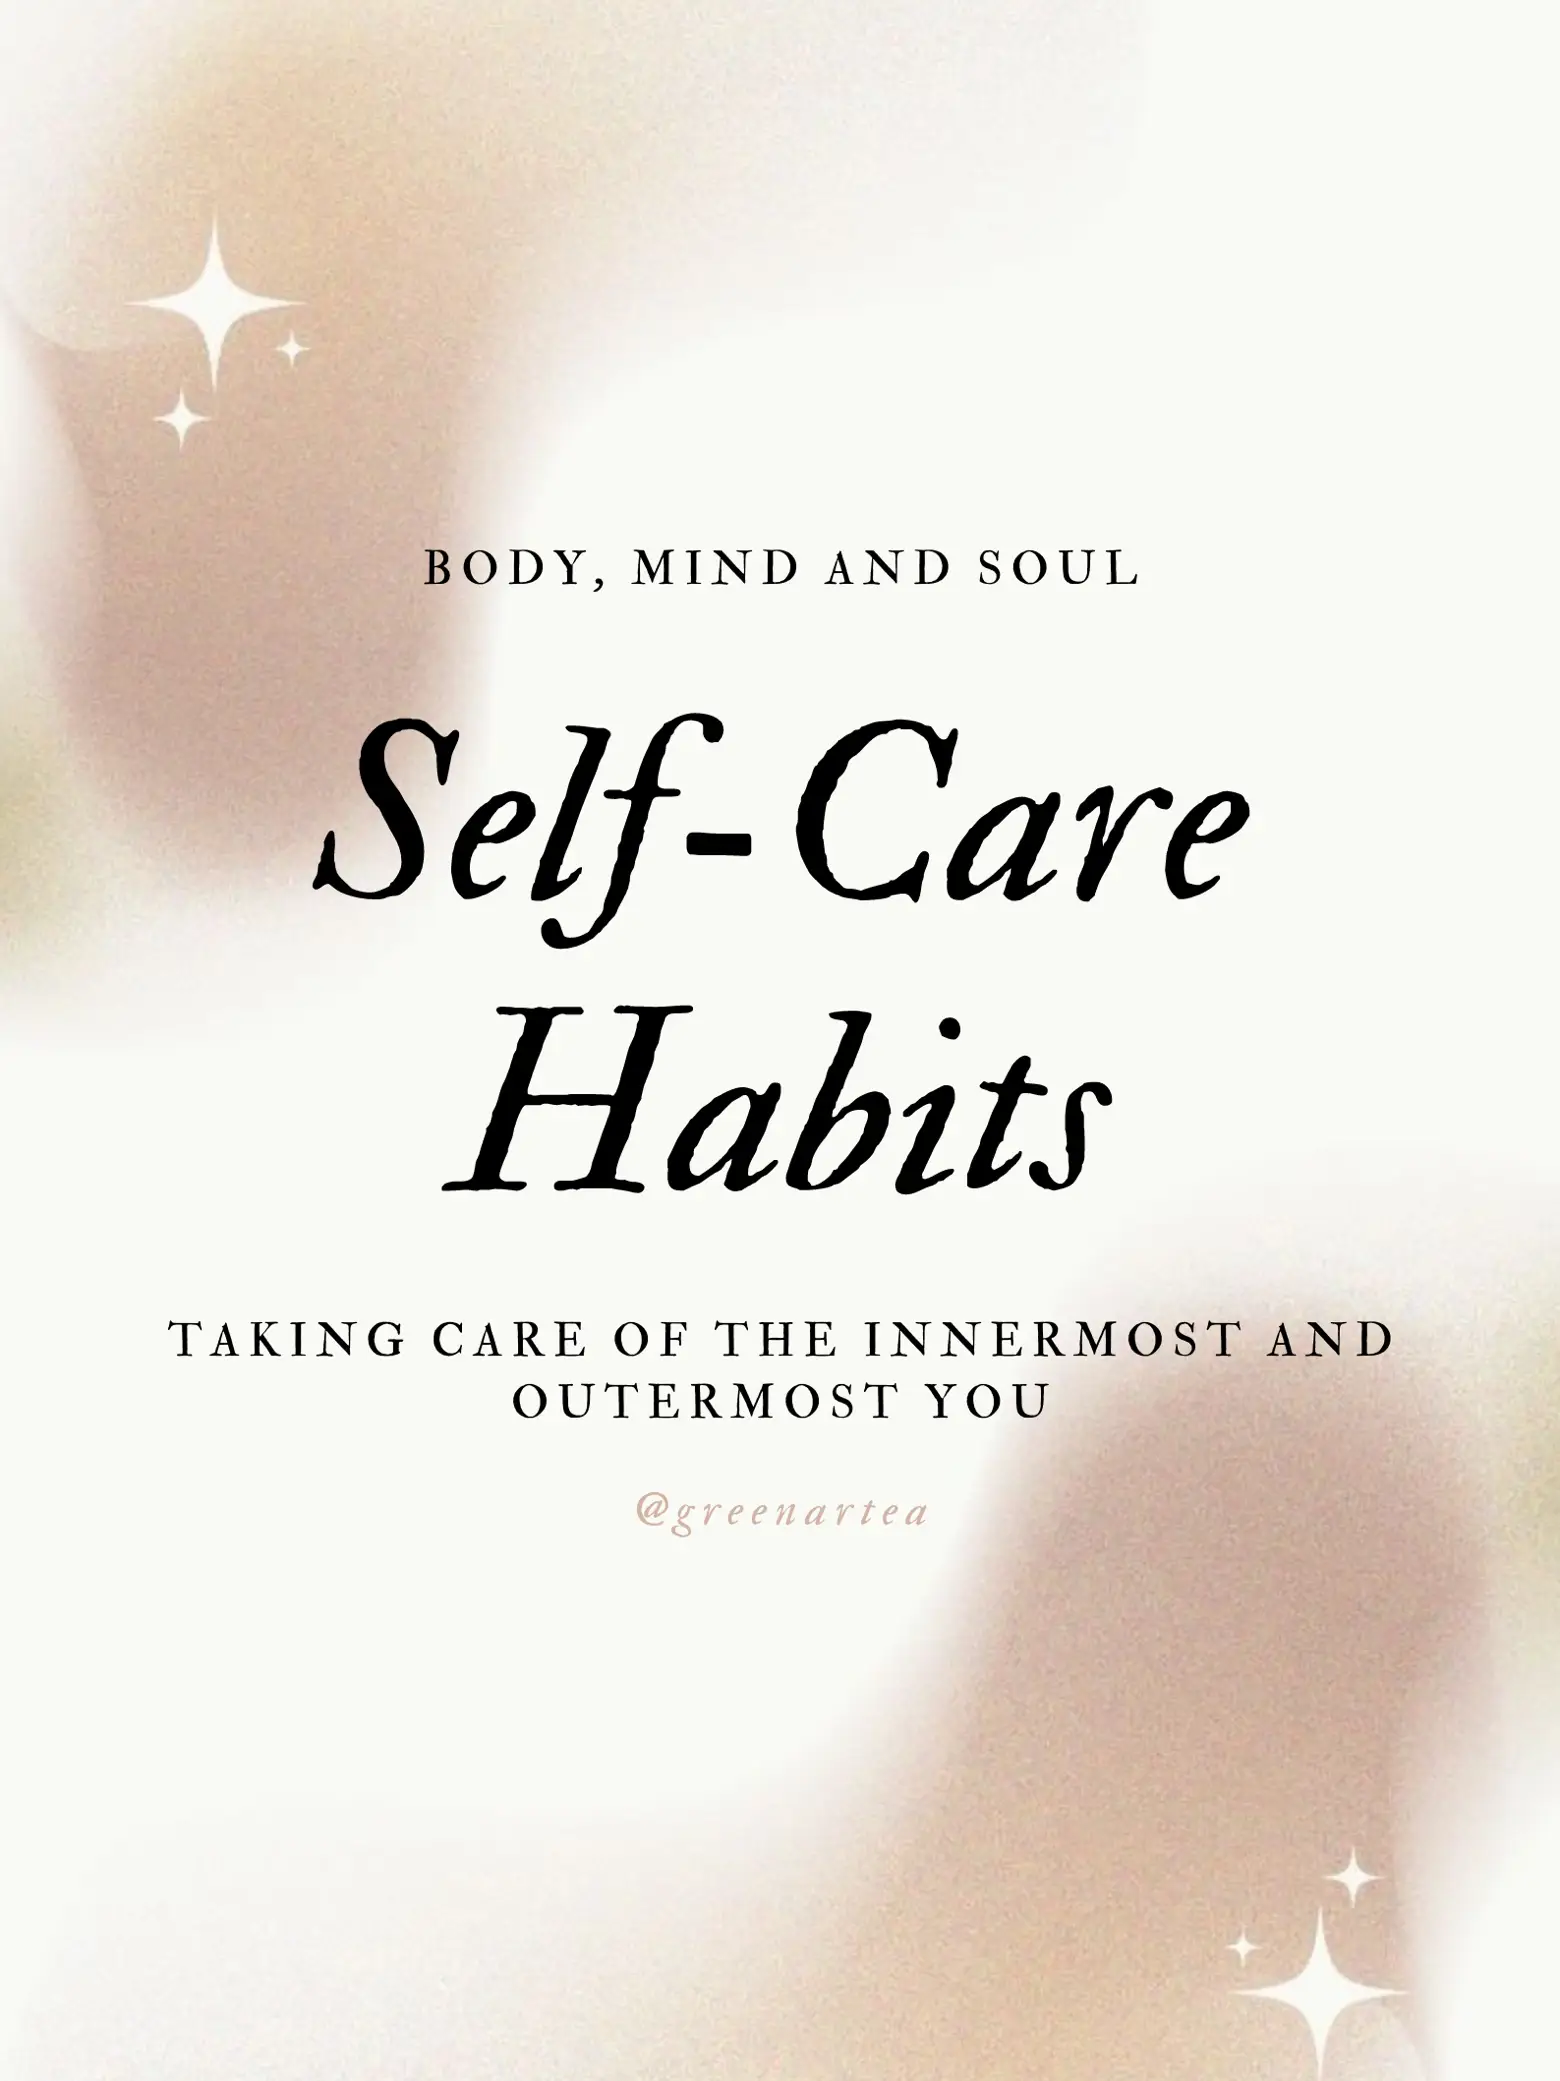 Self-Care Habits (body, mind and soul)'s images(0)